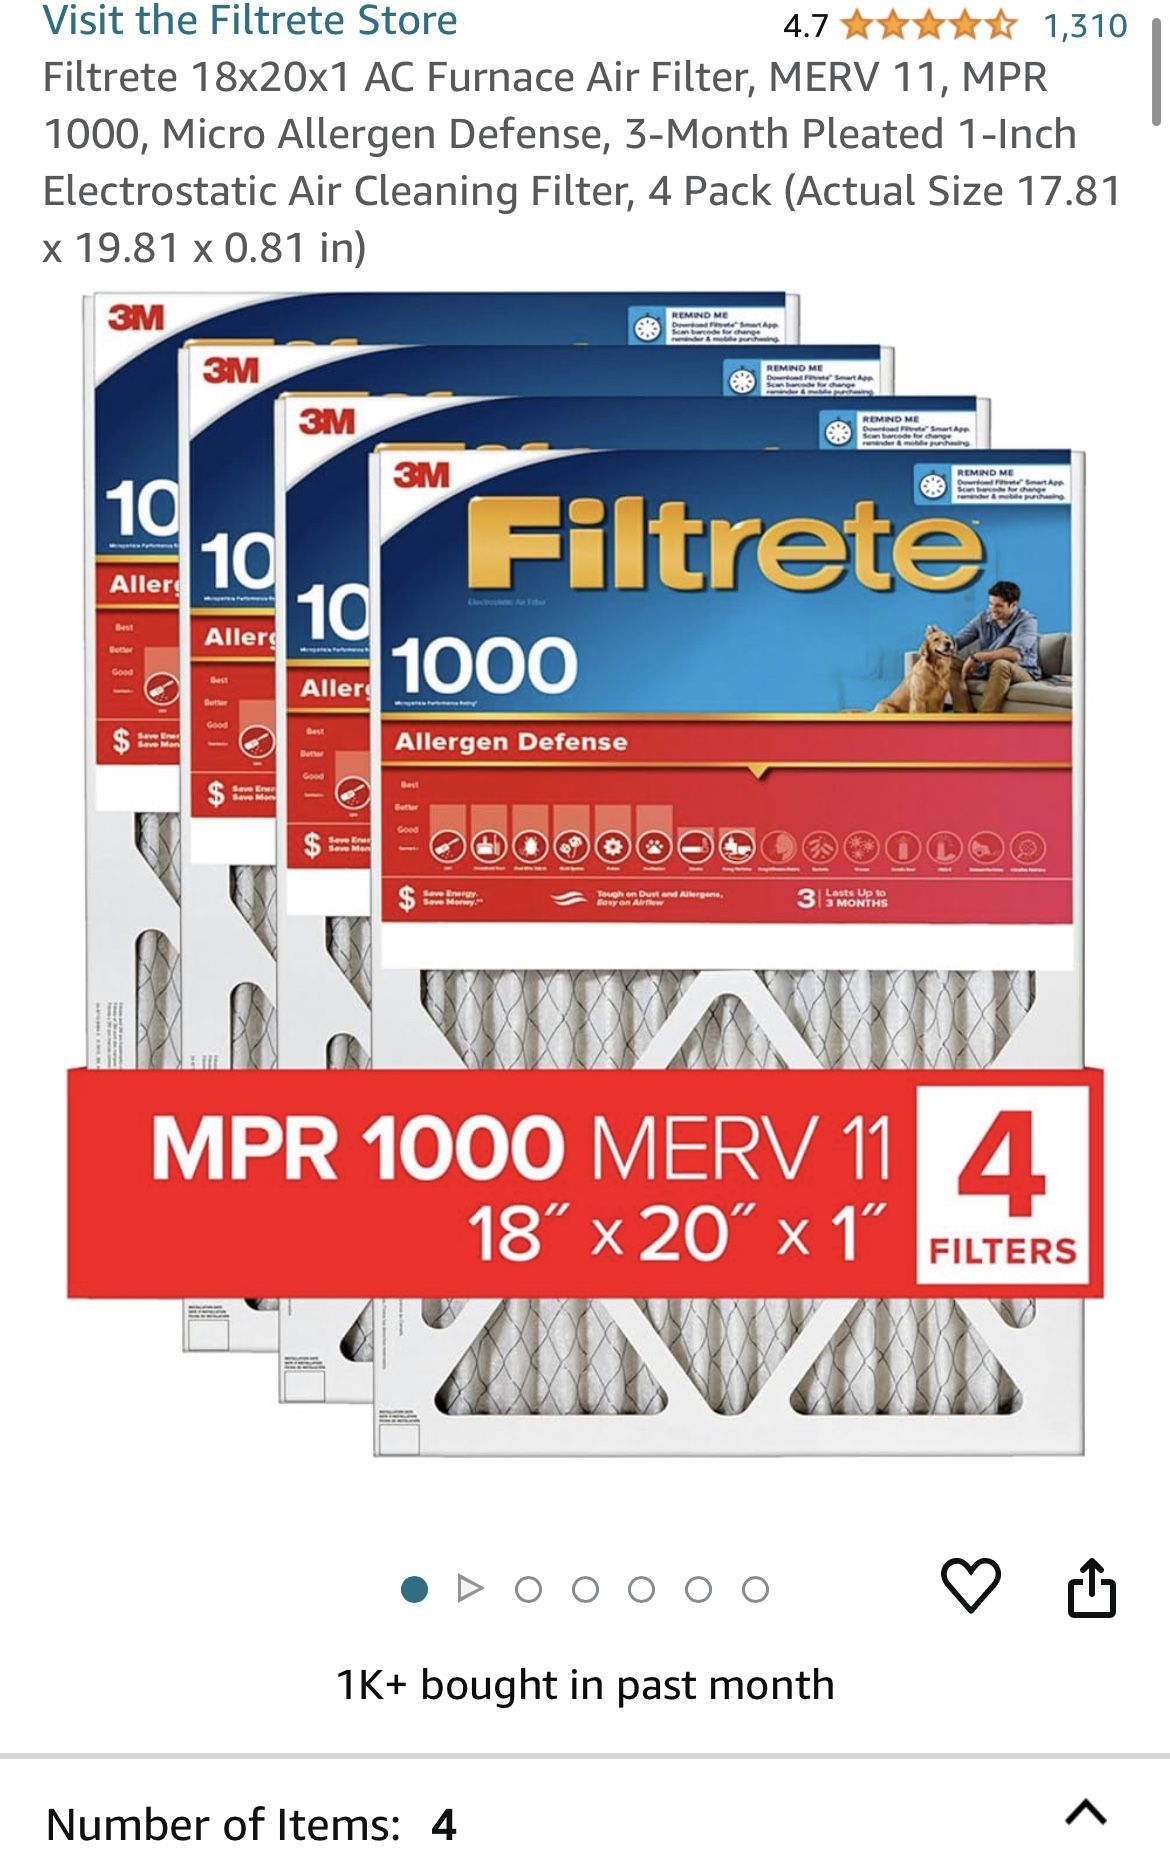 Filtrete 18x20x1 AC Furnace Air Filter, MERV 11, MPR 1000, Micro Allergen Defense, 3-Month Pleated 1-Inch Electrostatic Air Cleaning Filter, 4 Pack (A